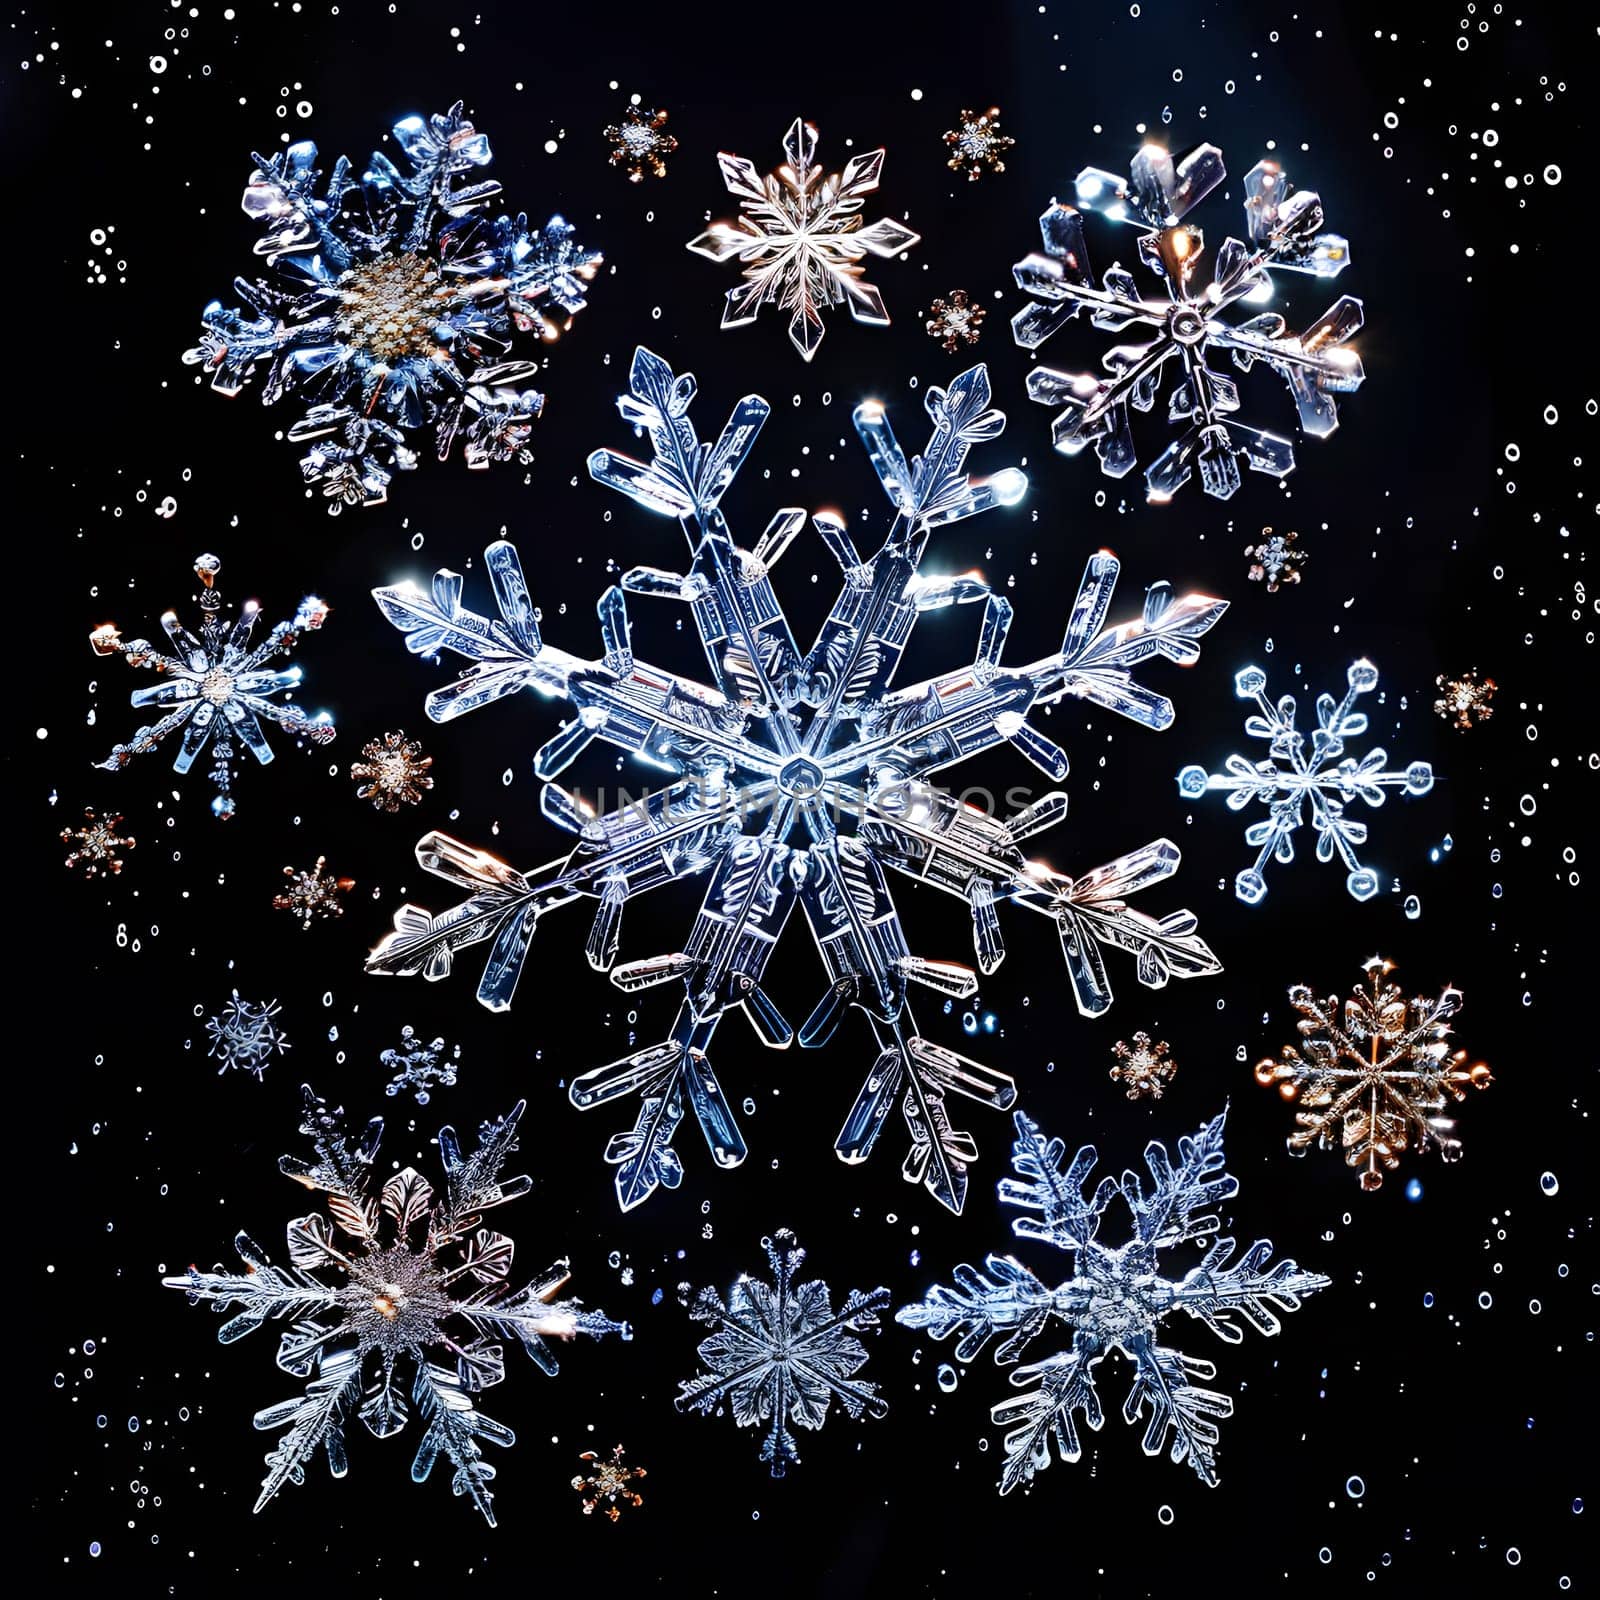 Electric blue snowflakes create a stunning pattern on a freezing black canvas by Nadtochiy